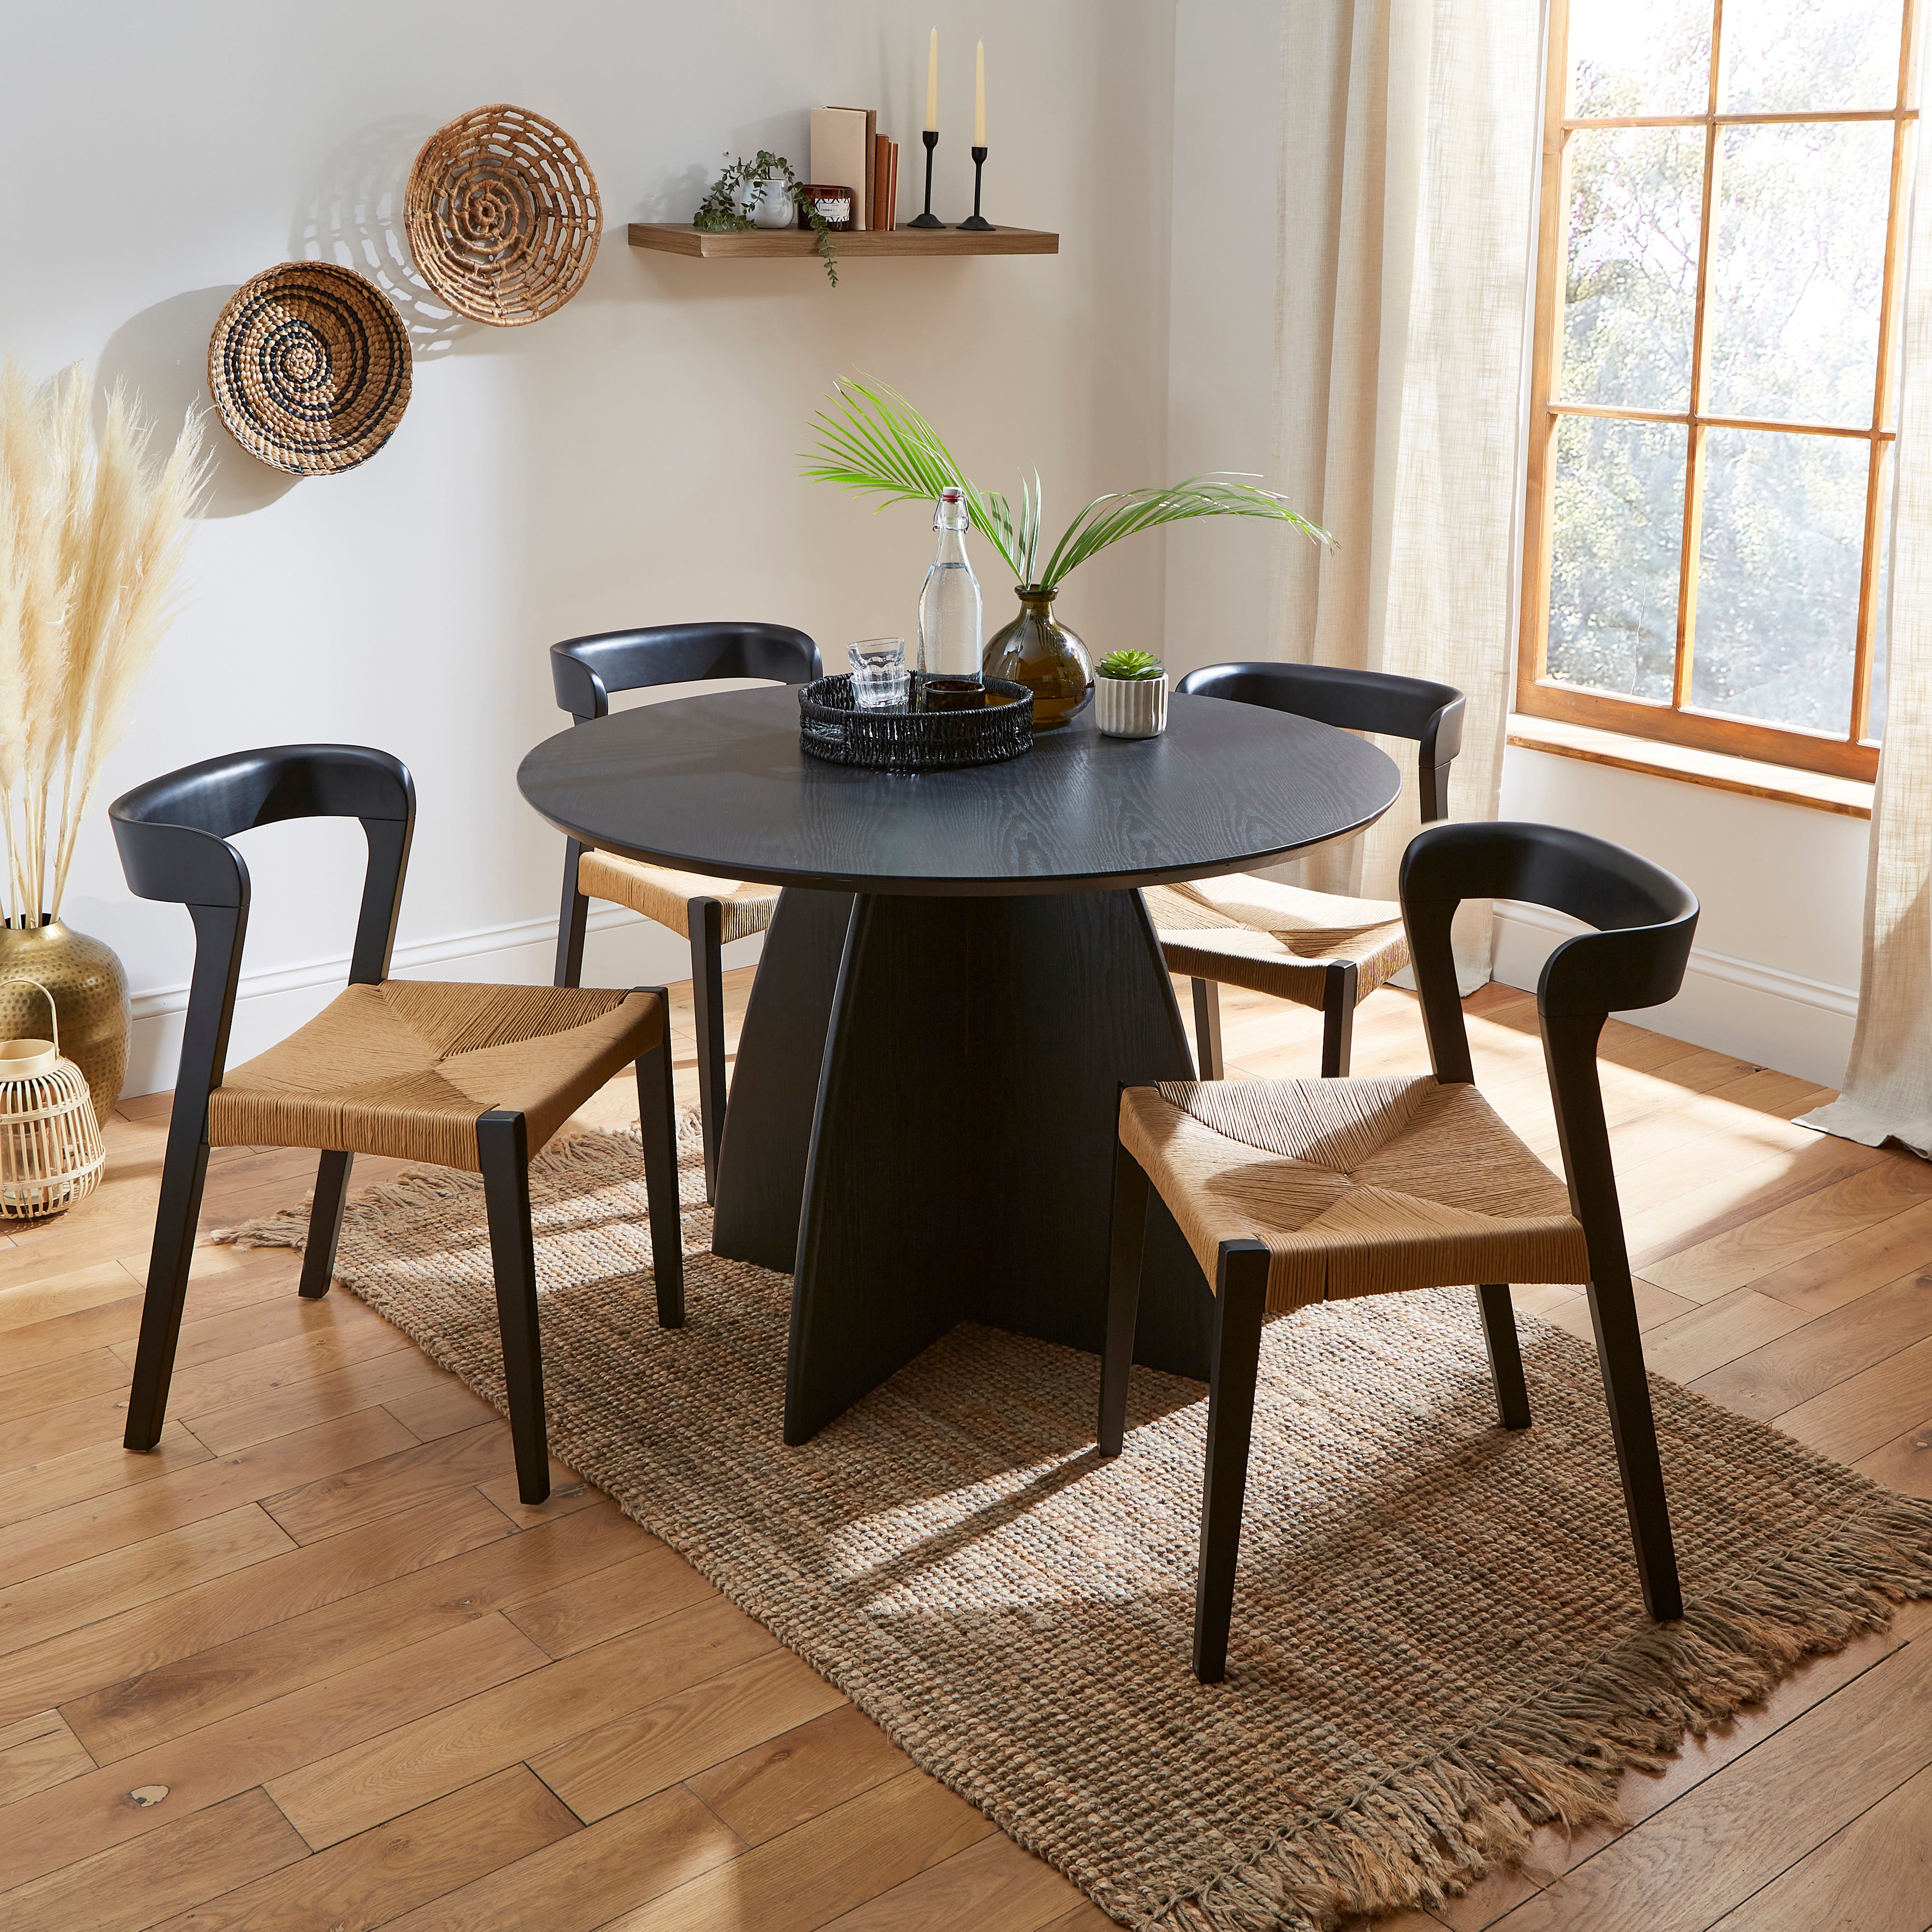 Effy 4 Seater Round Dining Table, Wood Effect Black